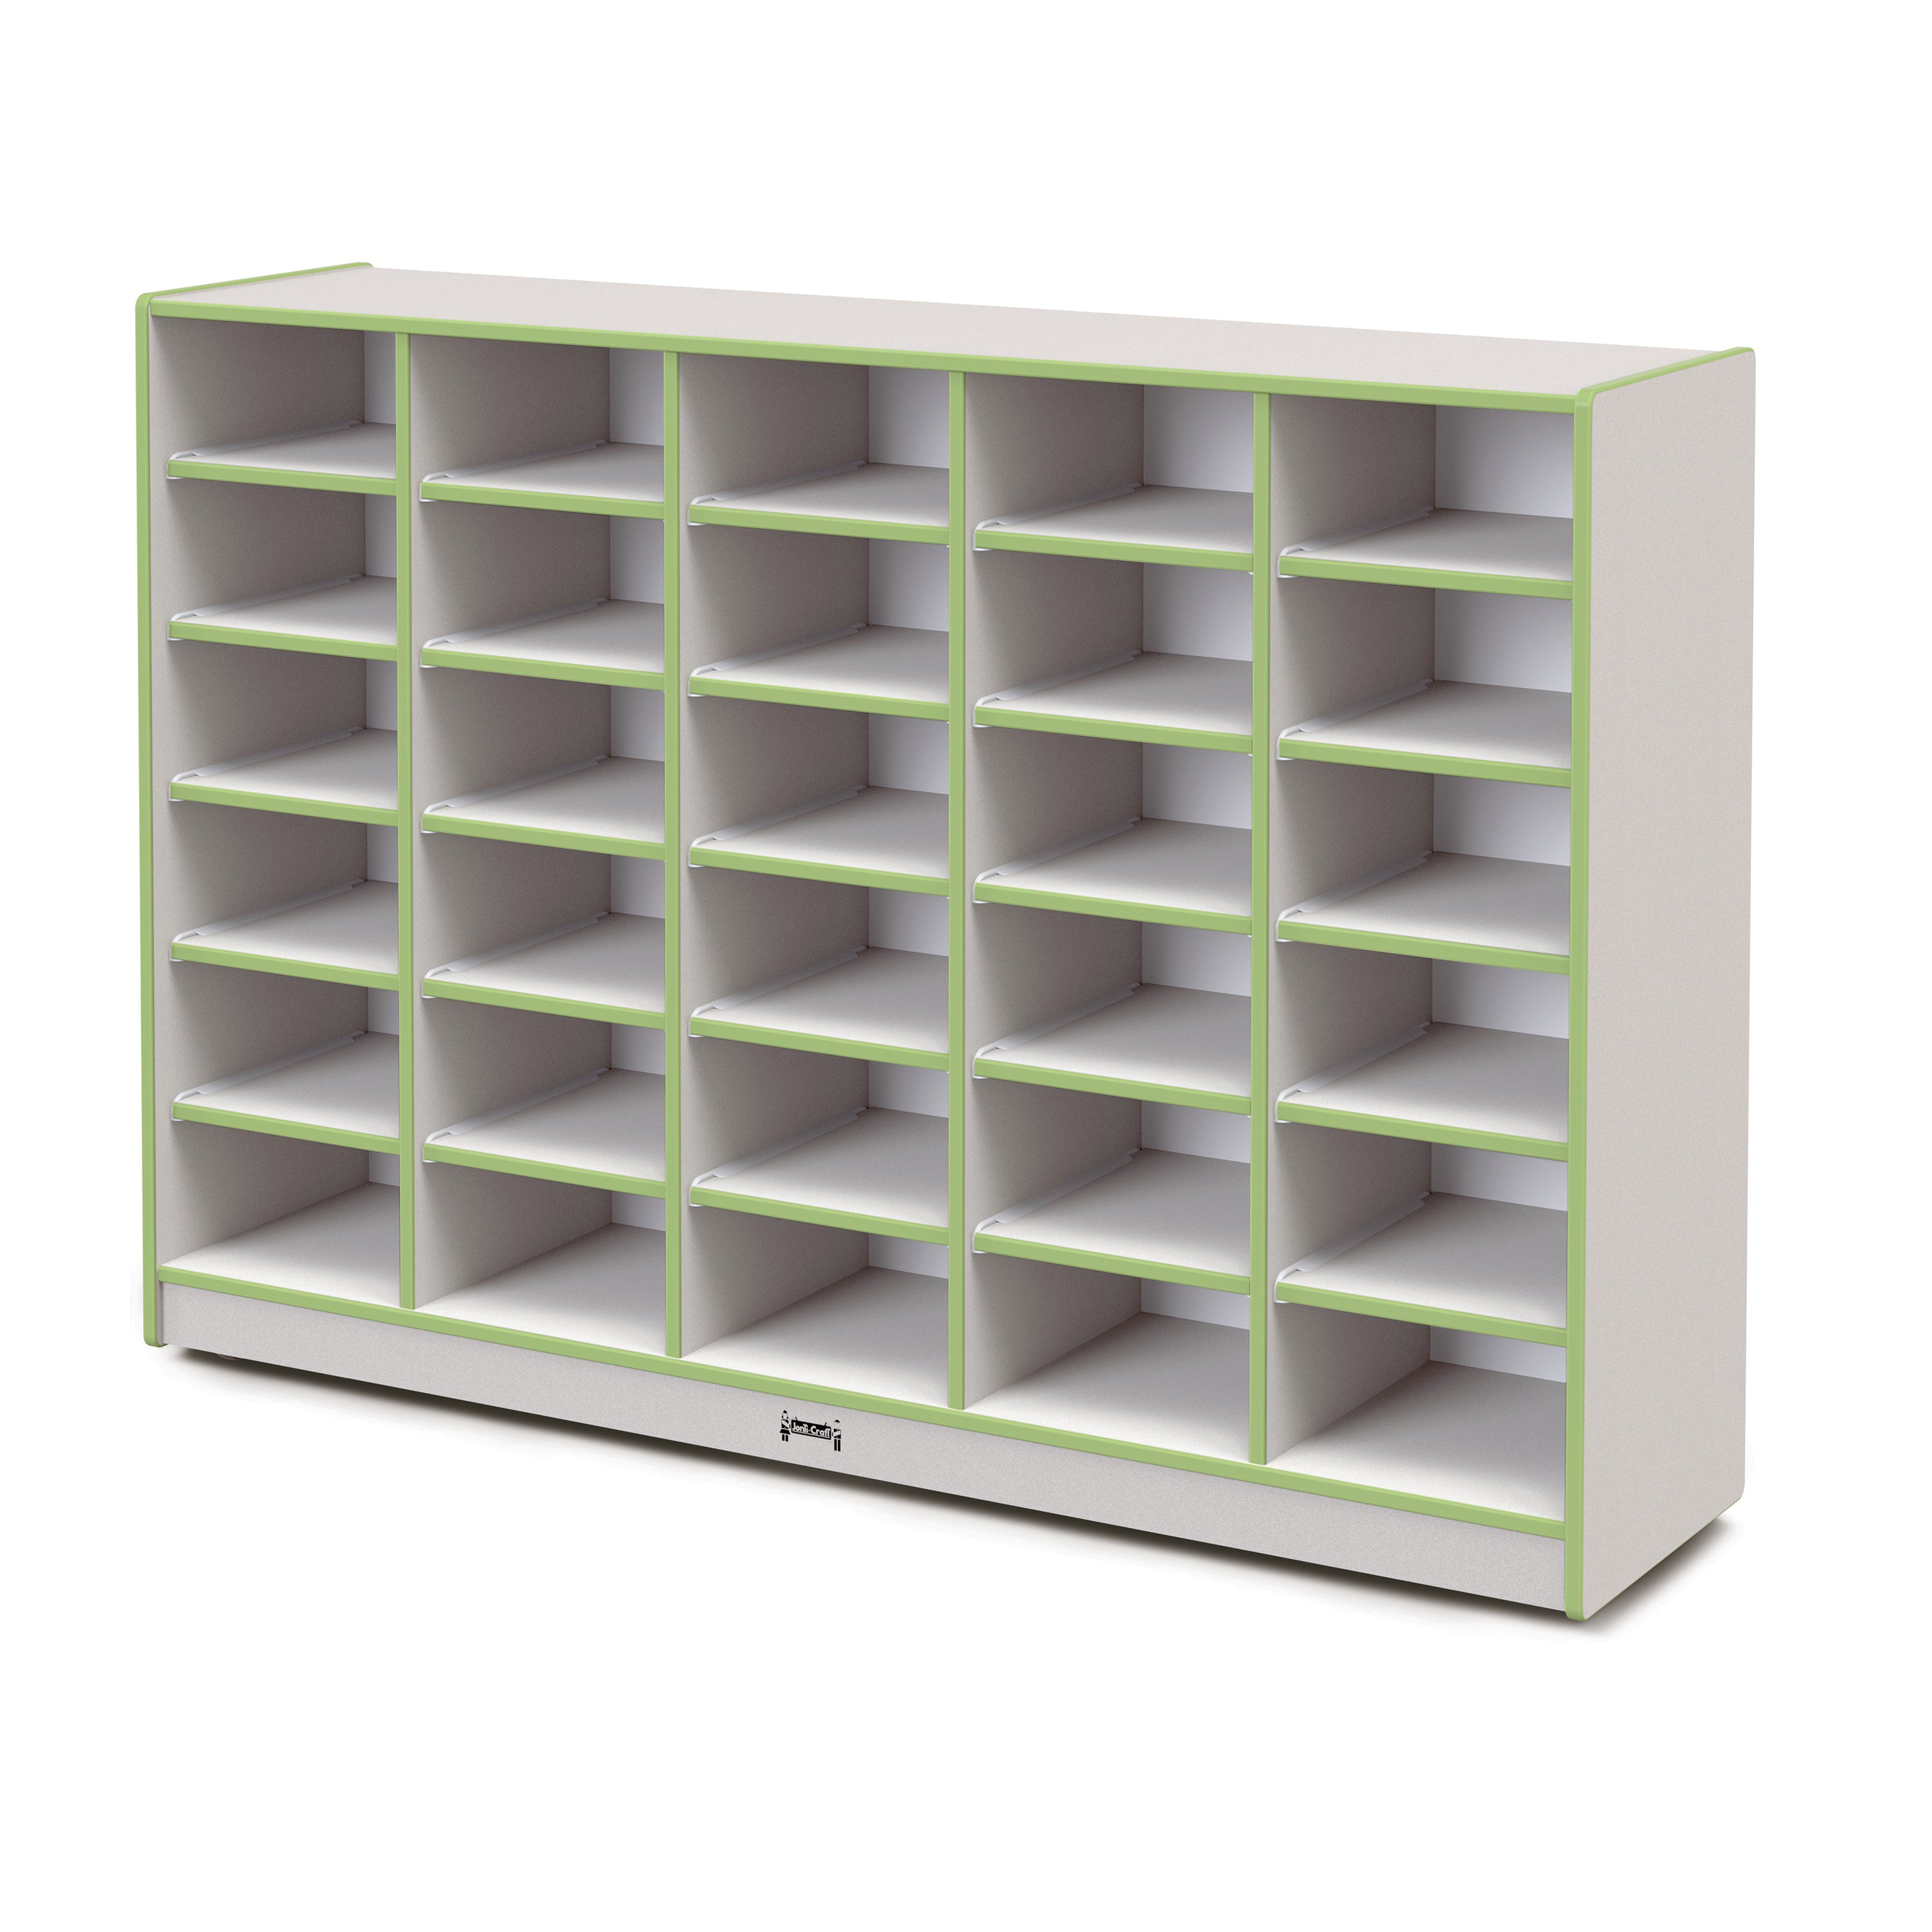 4030JCWW130, Rainbow Accents 30 Tub Mobile Storage - without Tubs - Key Lime Green